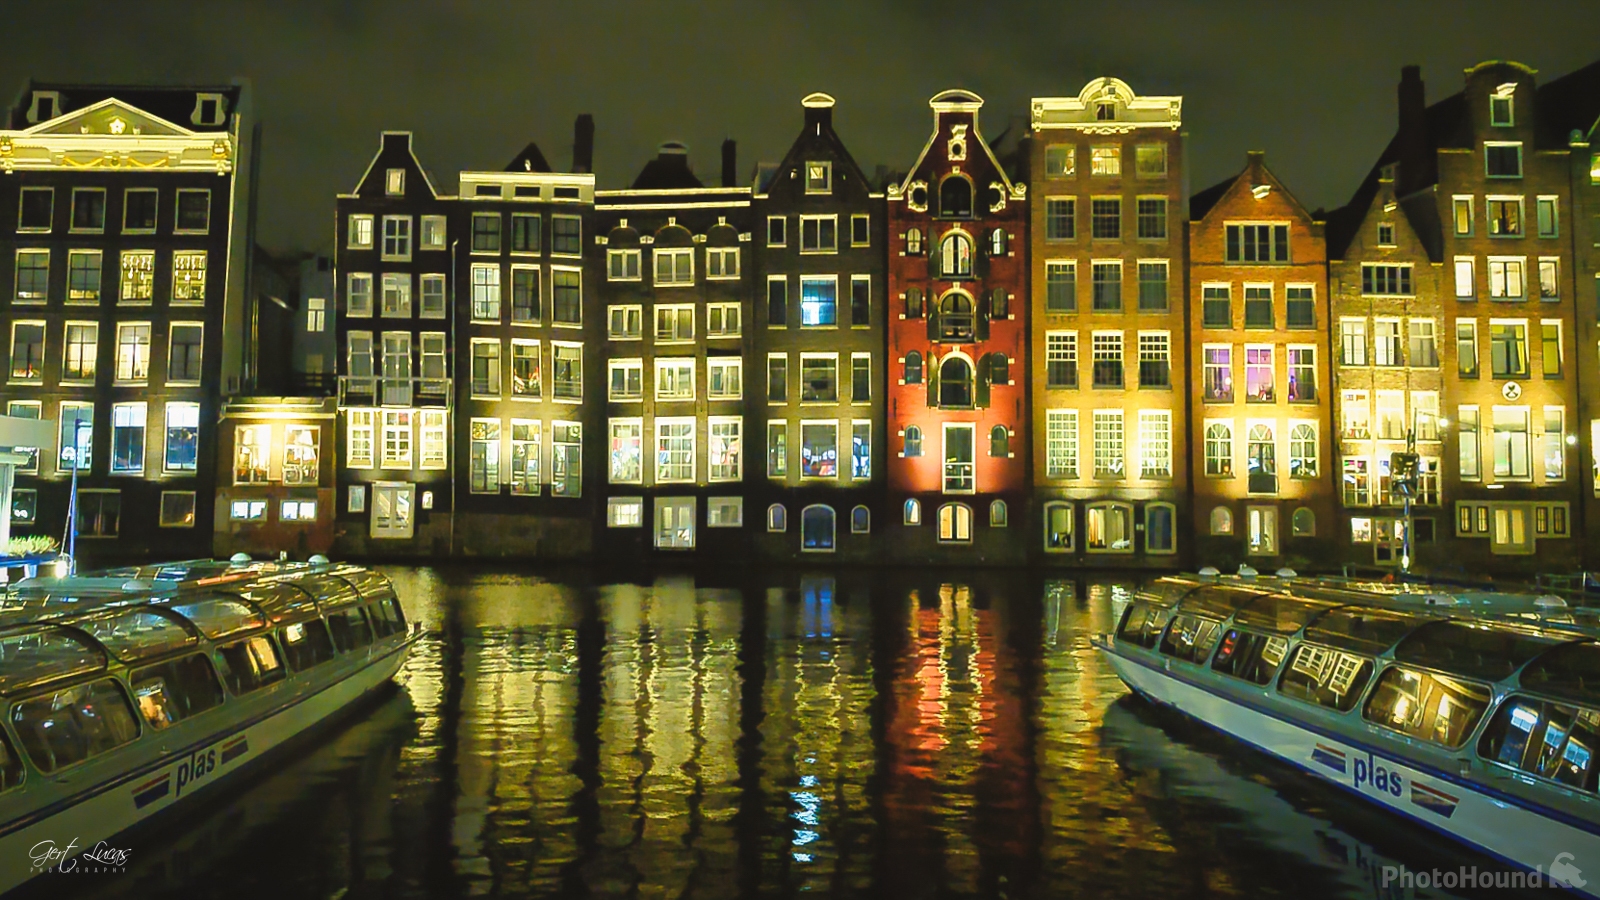 Image of Houses in the Damrak, Amsterdam by Gert Lucas